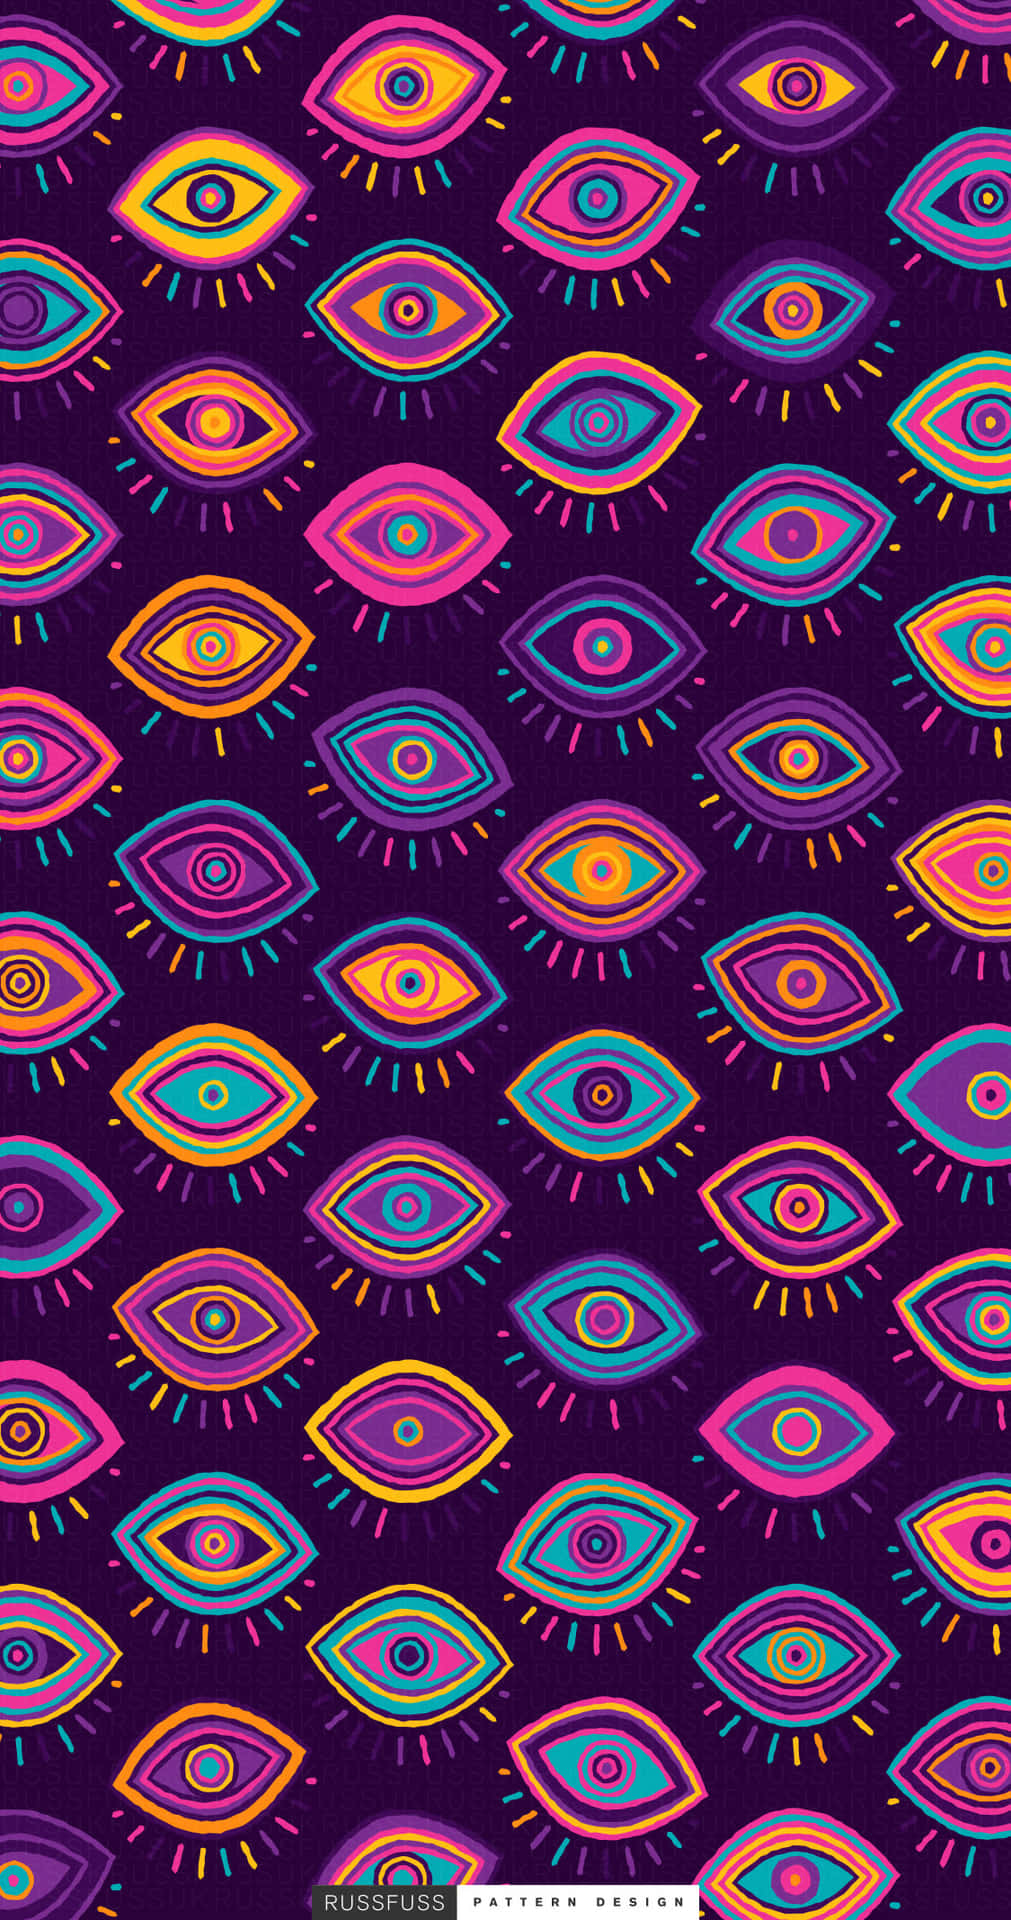 A Colorful Pattern With Many Colorful Eyes Wallpaper